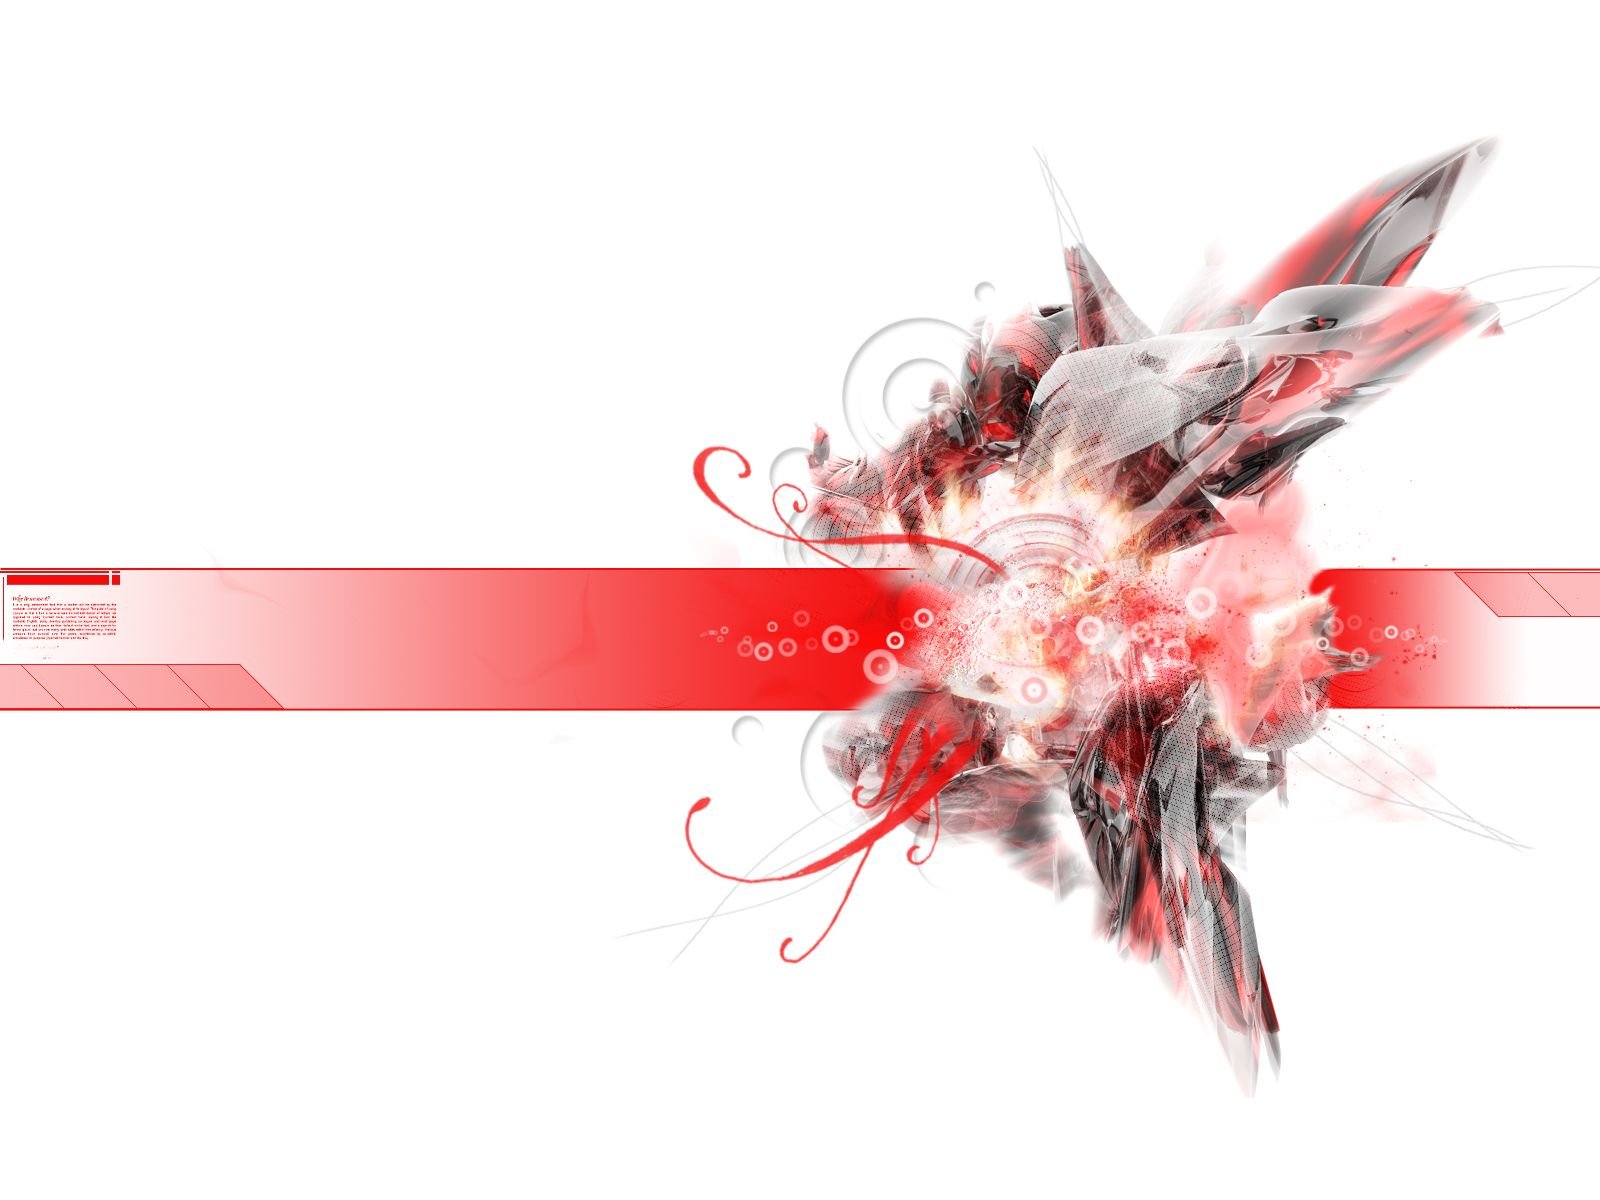 Red White And Black Abstract Wallpapers